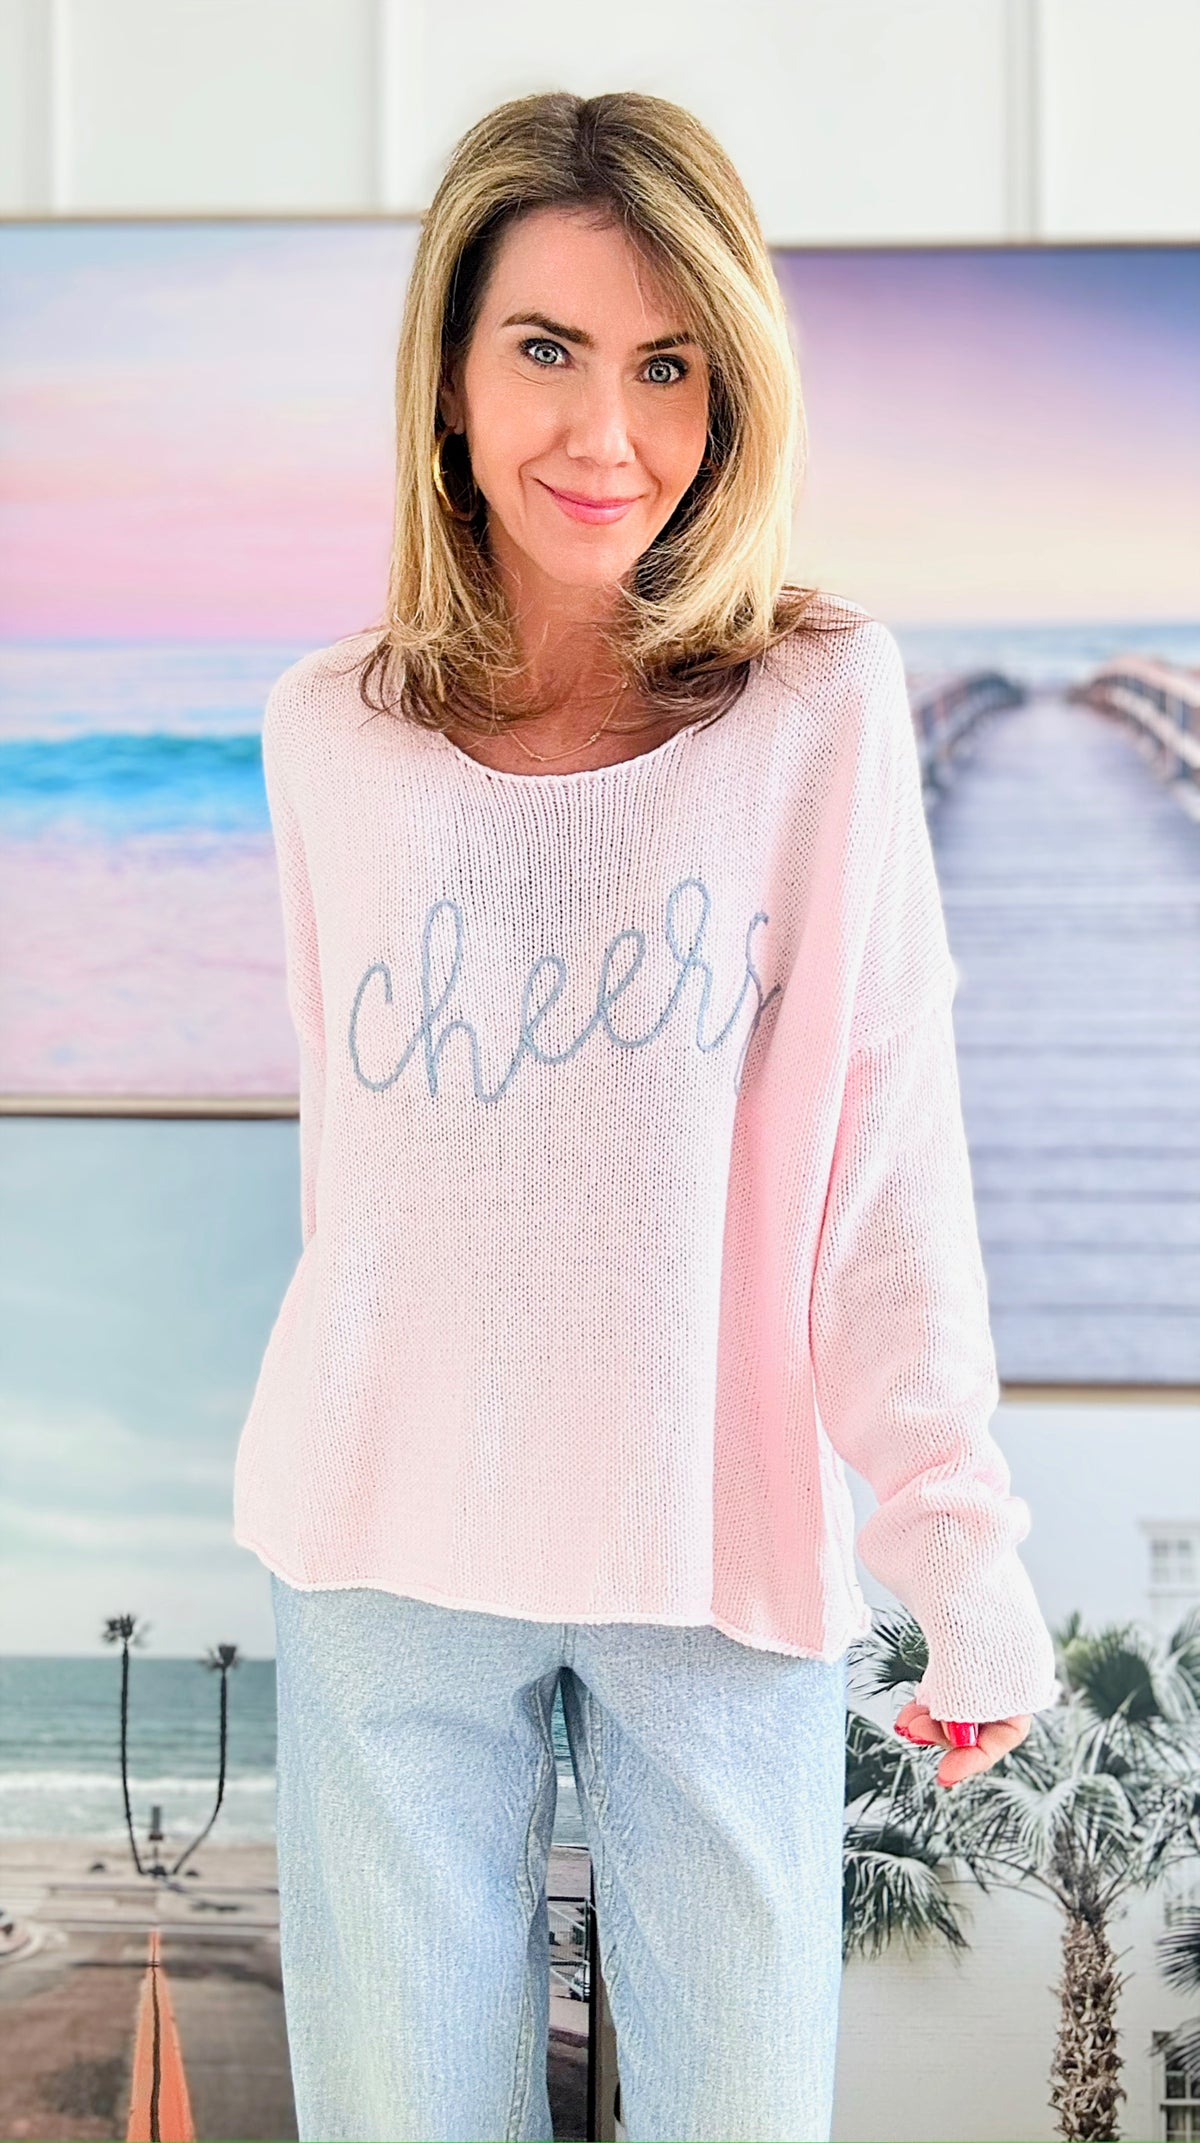 "Cheers" Lightweight Knit Sweater - Blush-140 Sweaters-Miracle-Coastal Bloom Boutique, find the trendiest versions of the popular styles and looks Located in Indialantic, FL